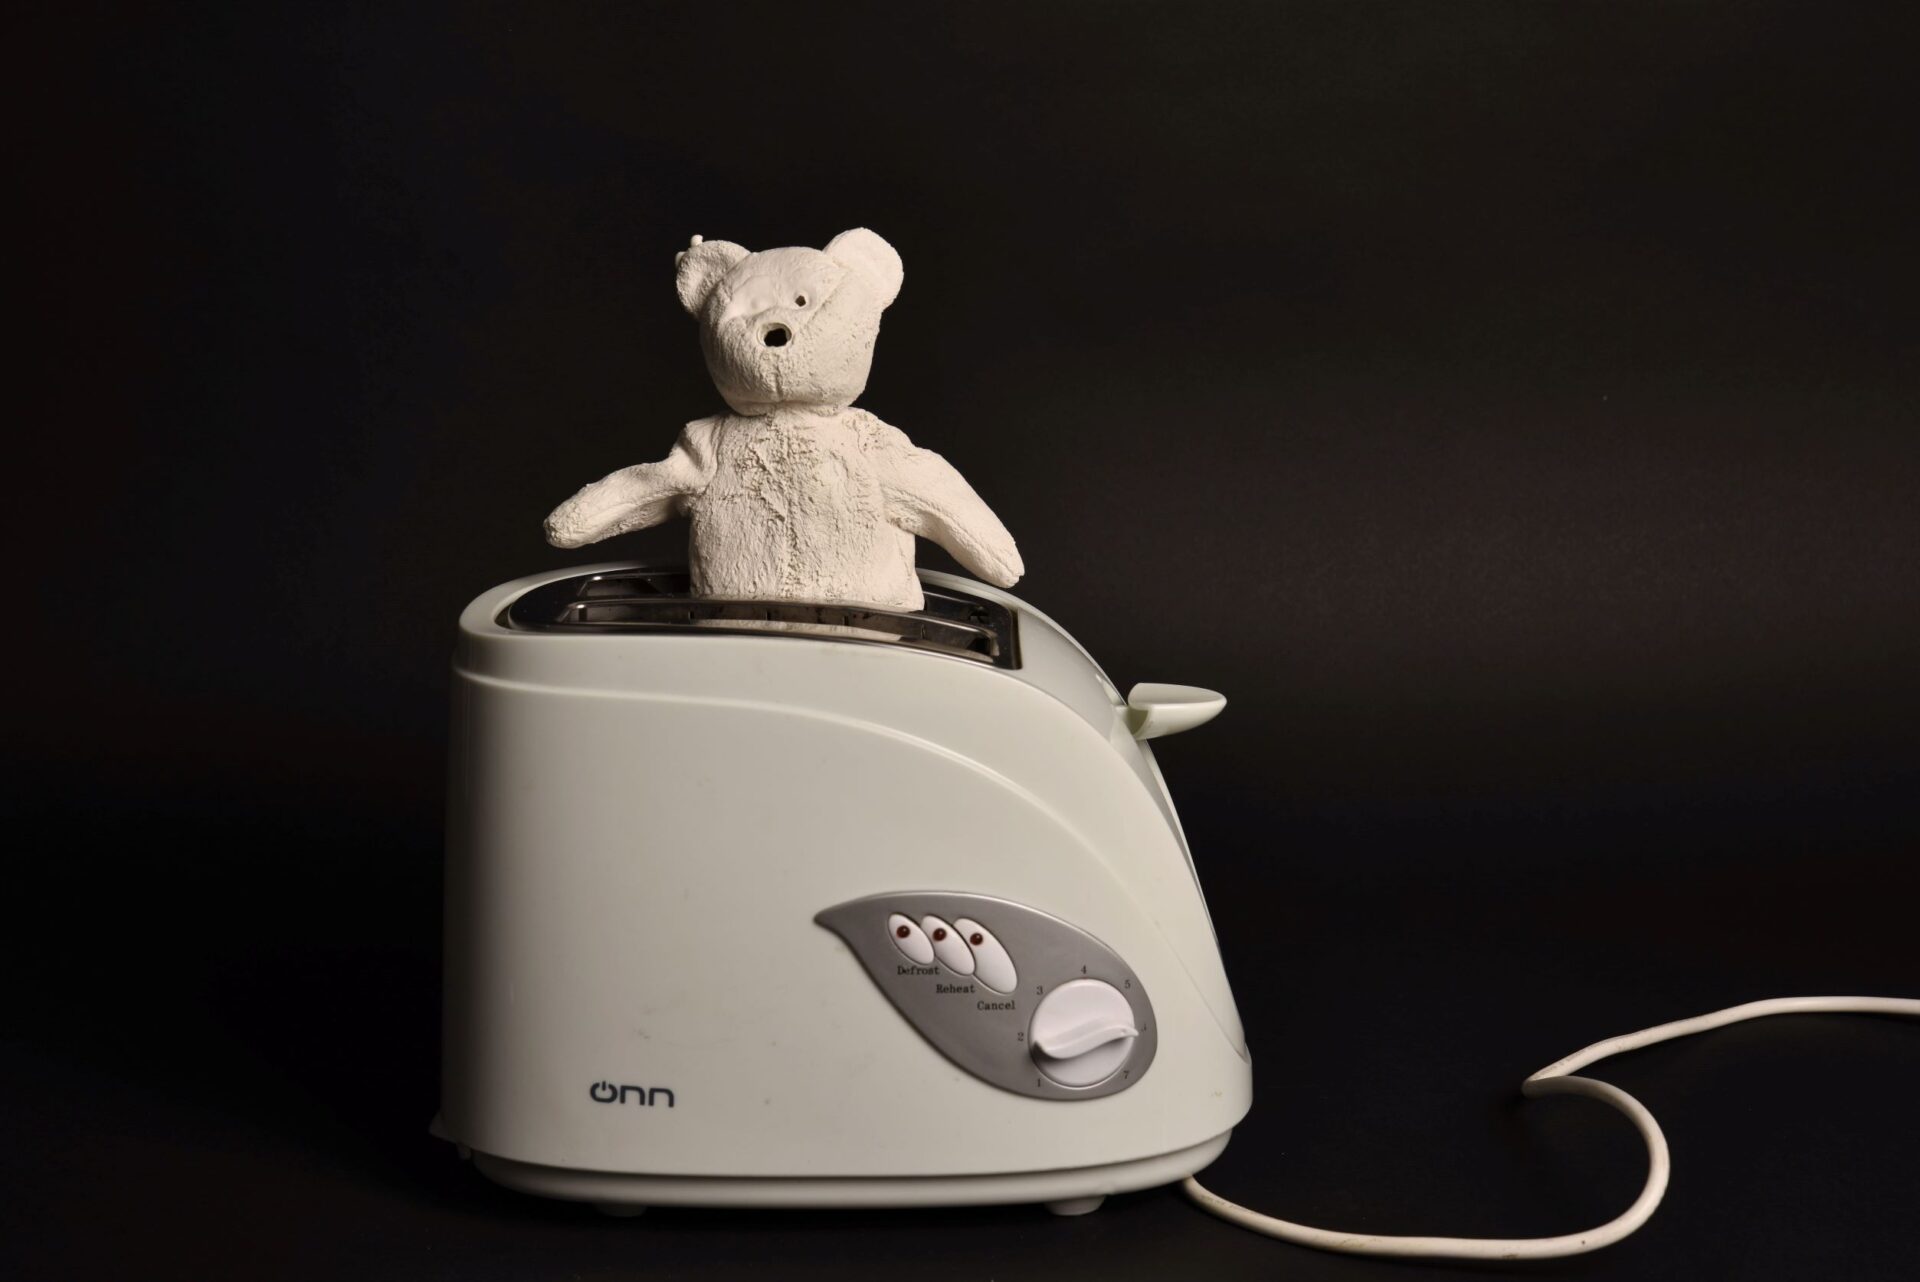 Teddy in a toaster I, fired clay slip teddy, ONN toaster, dimensions variable, 2021 POA